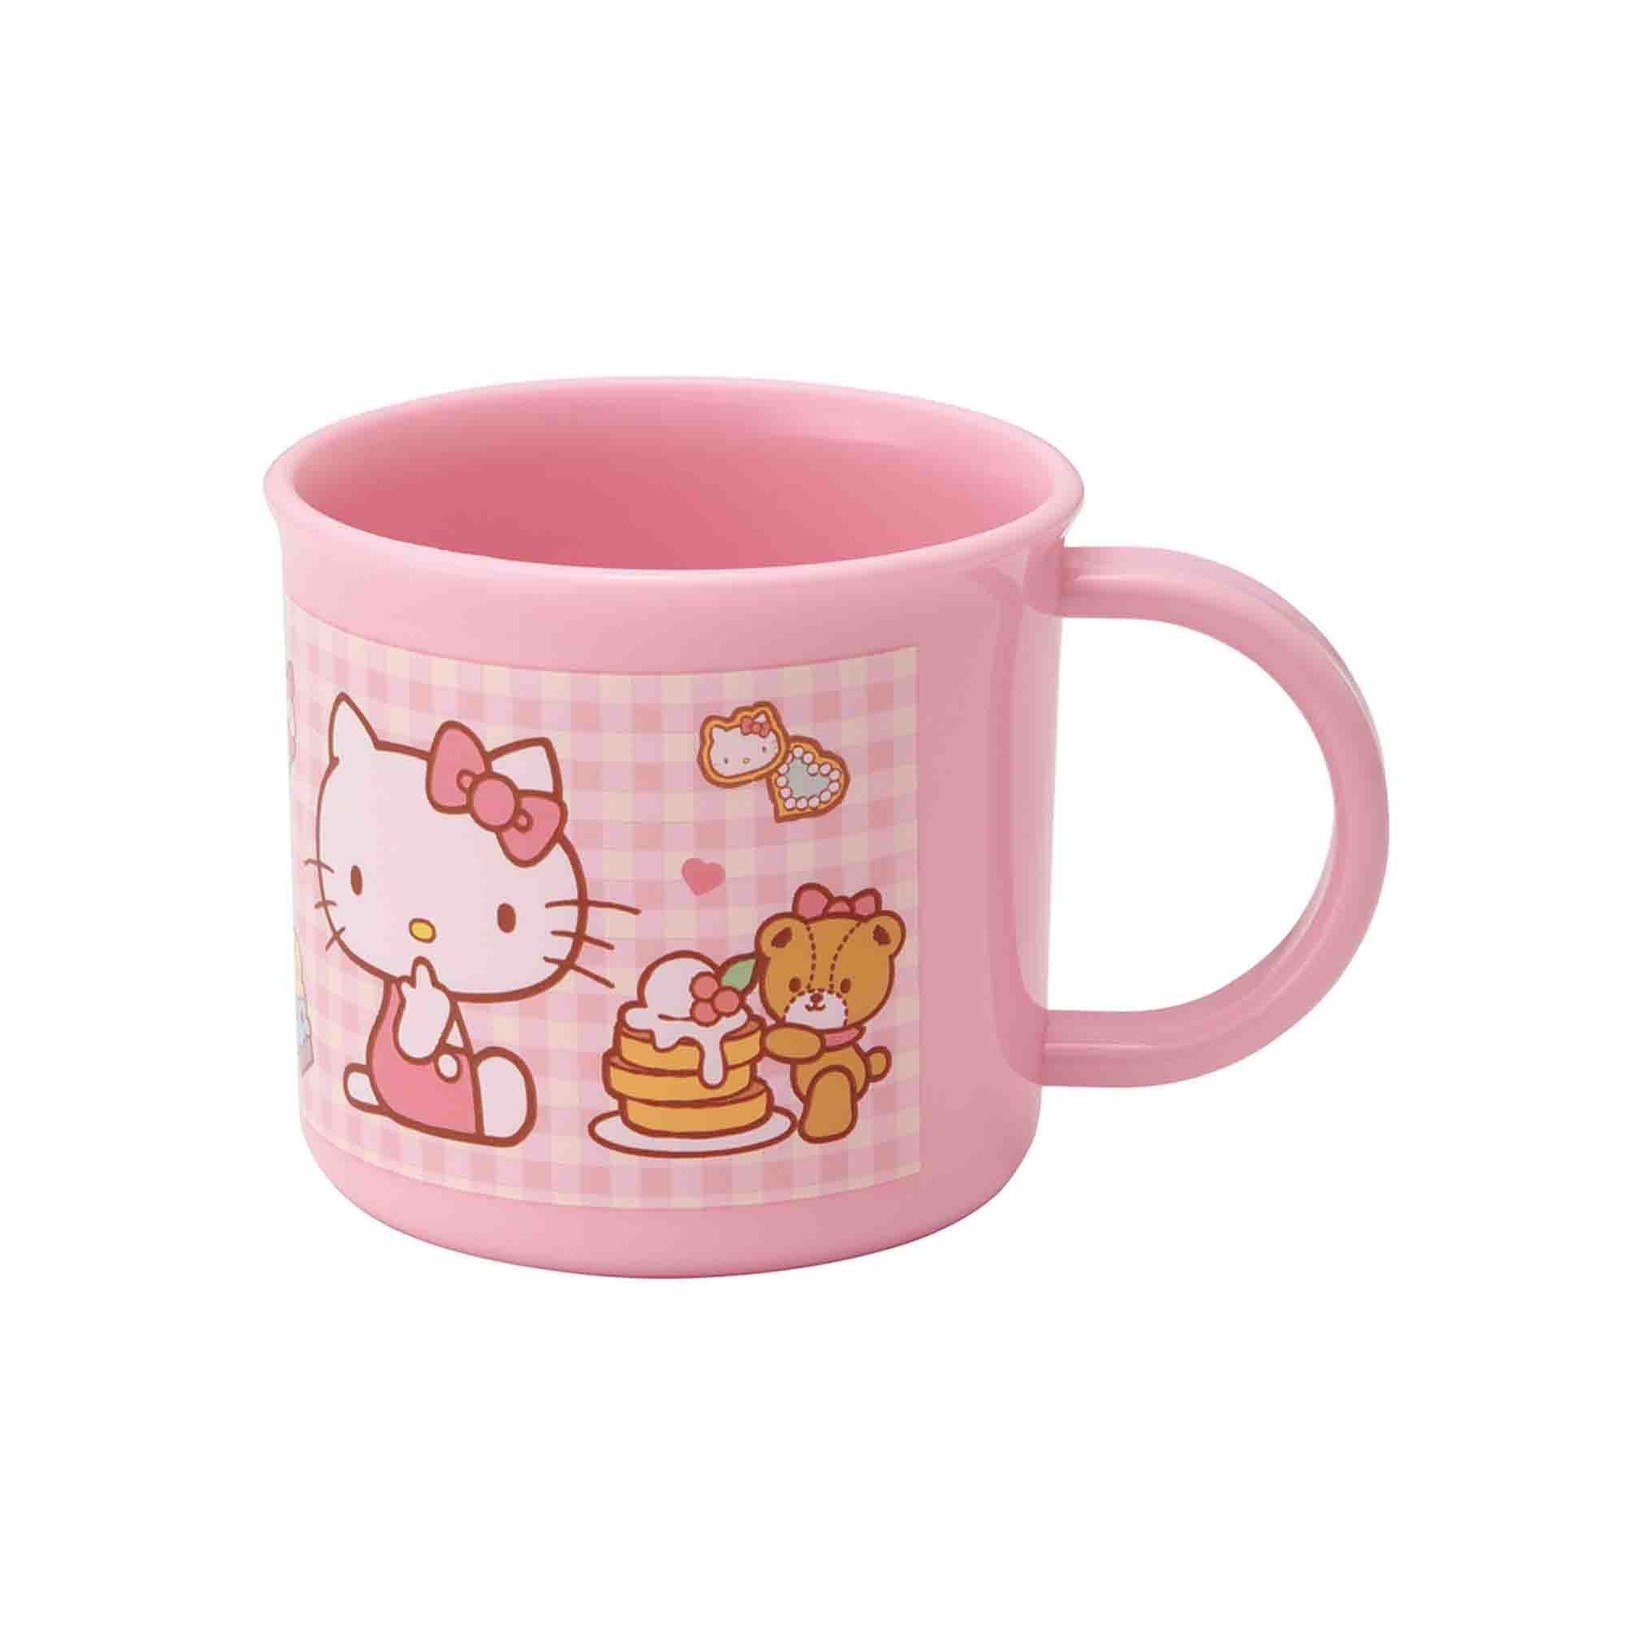 Skater Cup - Hello Kitty Cup 6oz (Sweets) - SK-SR-8117